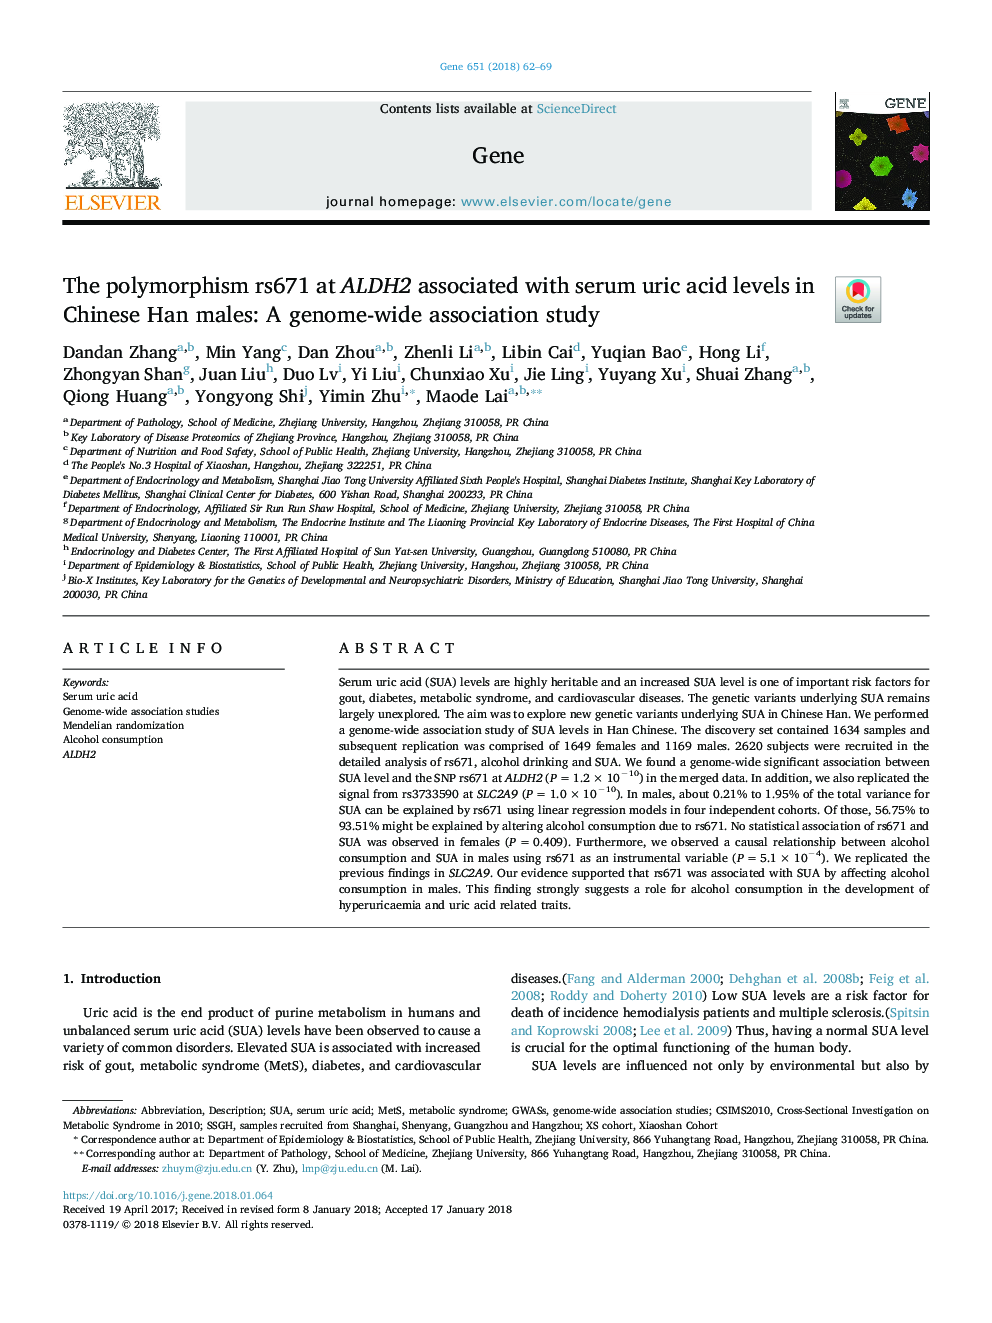 The polymorphism rs671 at ALDH2 associated with serum uric acid levels in Chinese Han males: A genome-wide association study